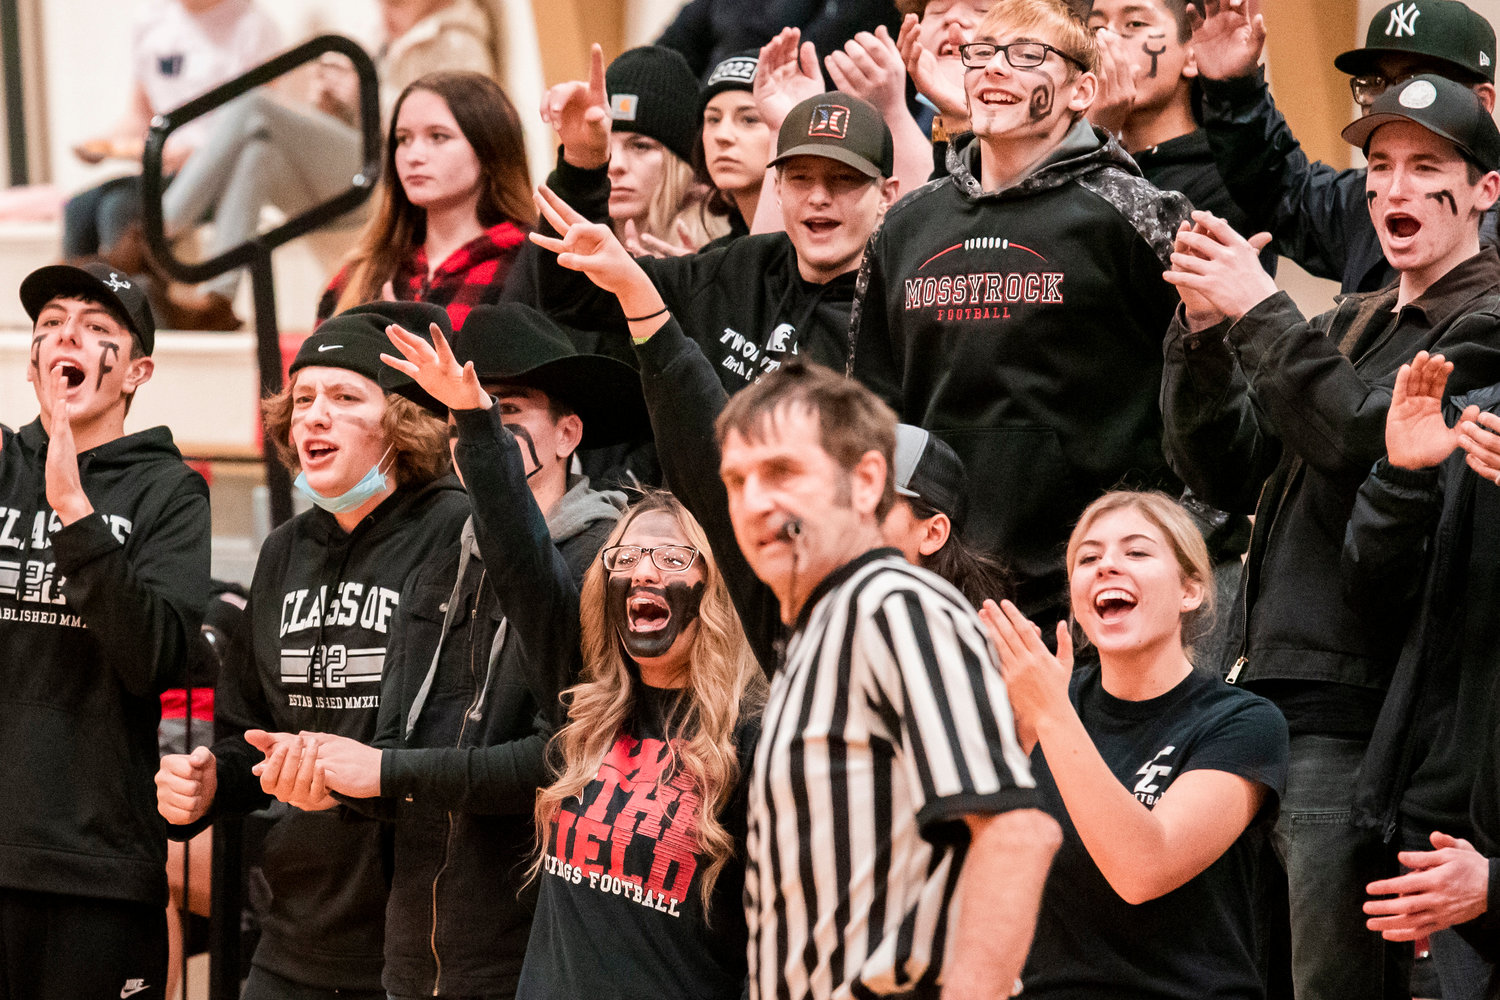 Viking fans celebrate a three-point basket during a game Wednesday night at Mossyrock High School.